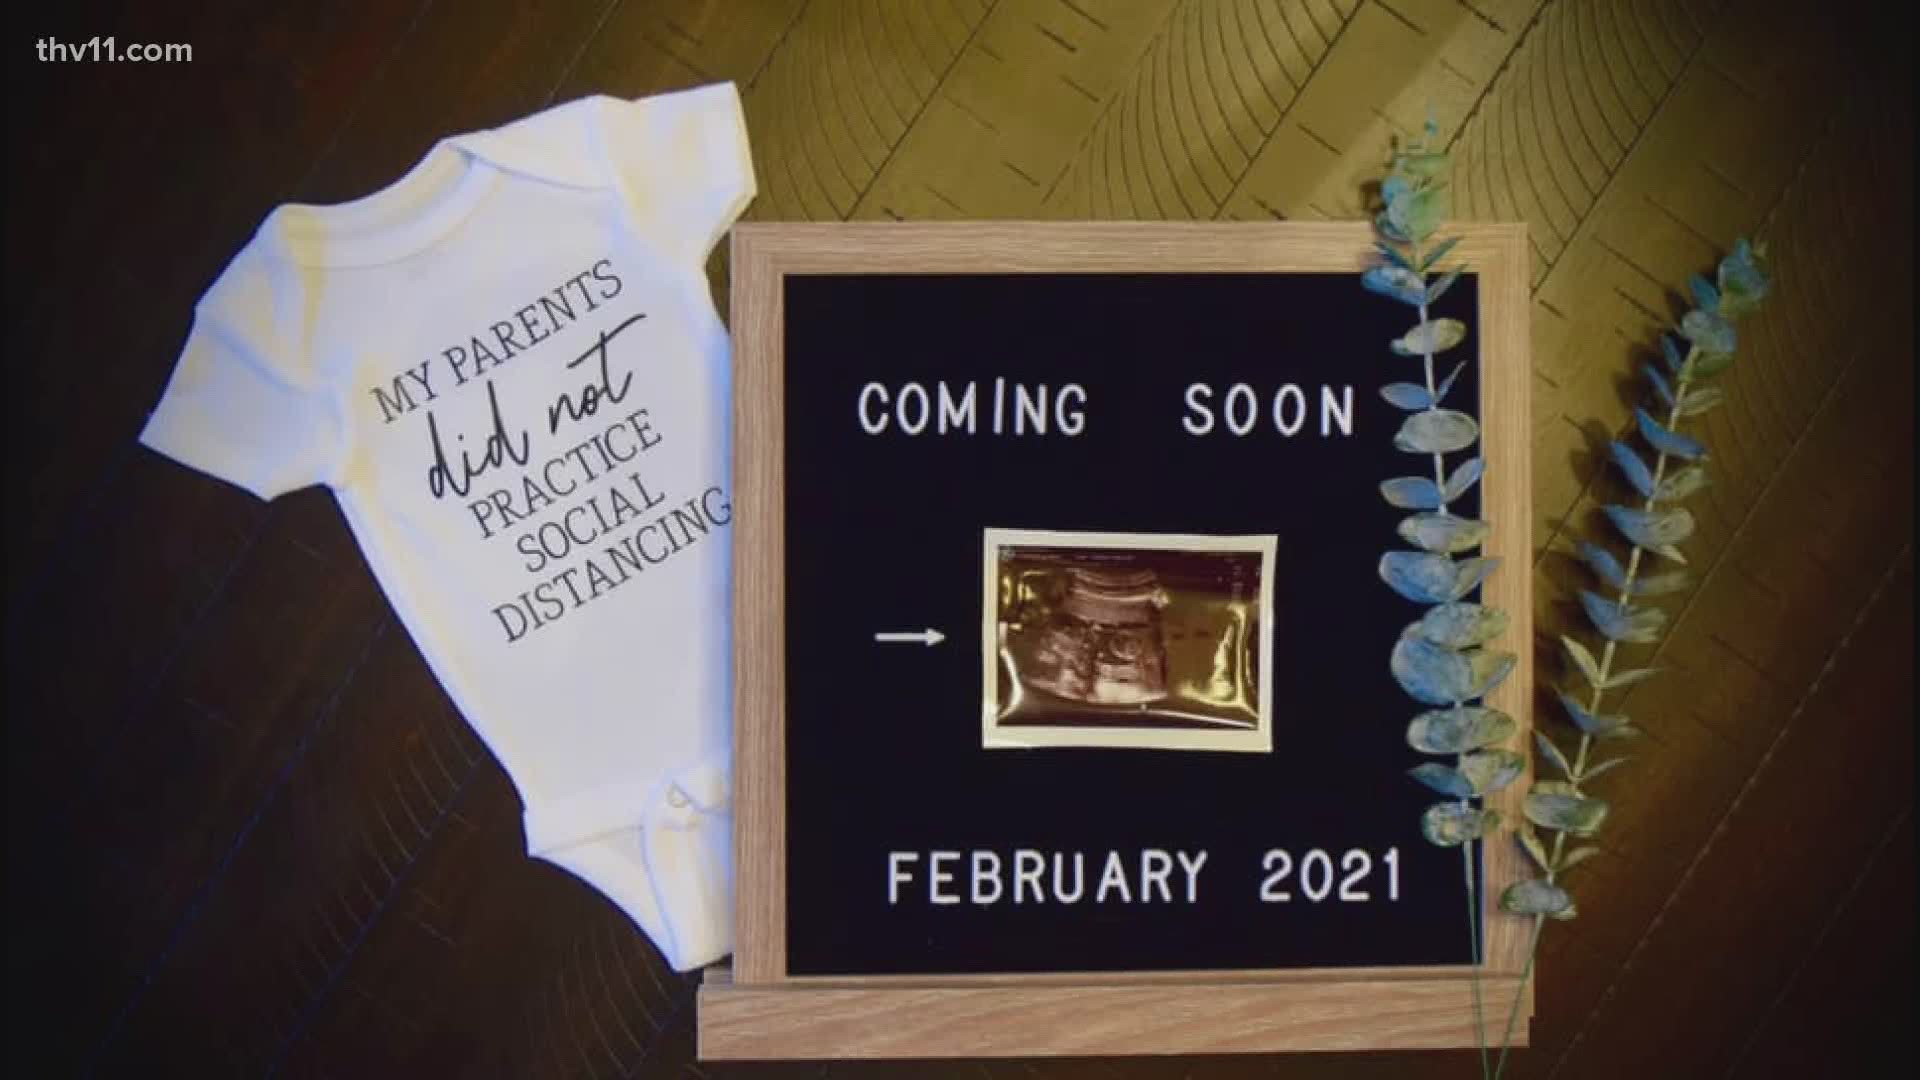 Congratulations to Marlissa Goldsmith and her husband Ledarius Anthony (L.A.)! Marlisa shared a picture of an adorable onesie and sign on her Facebook page.